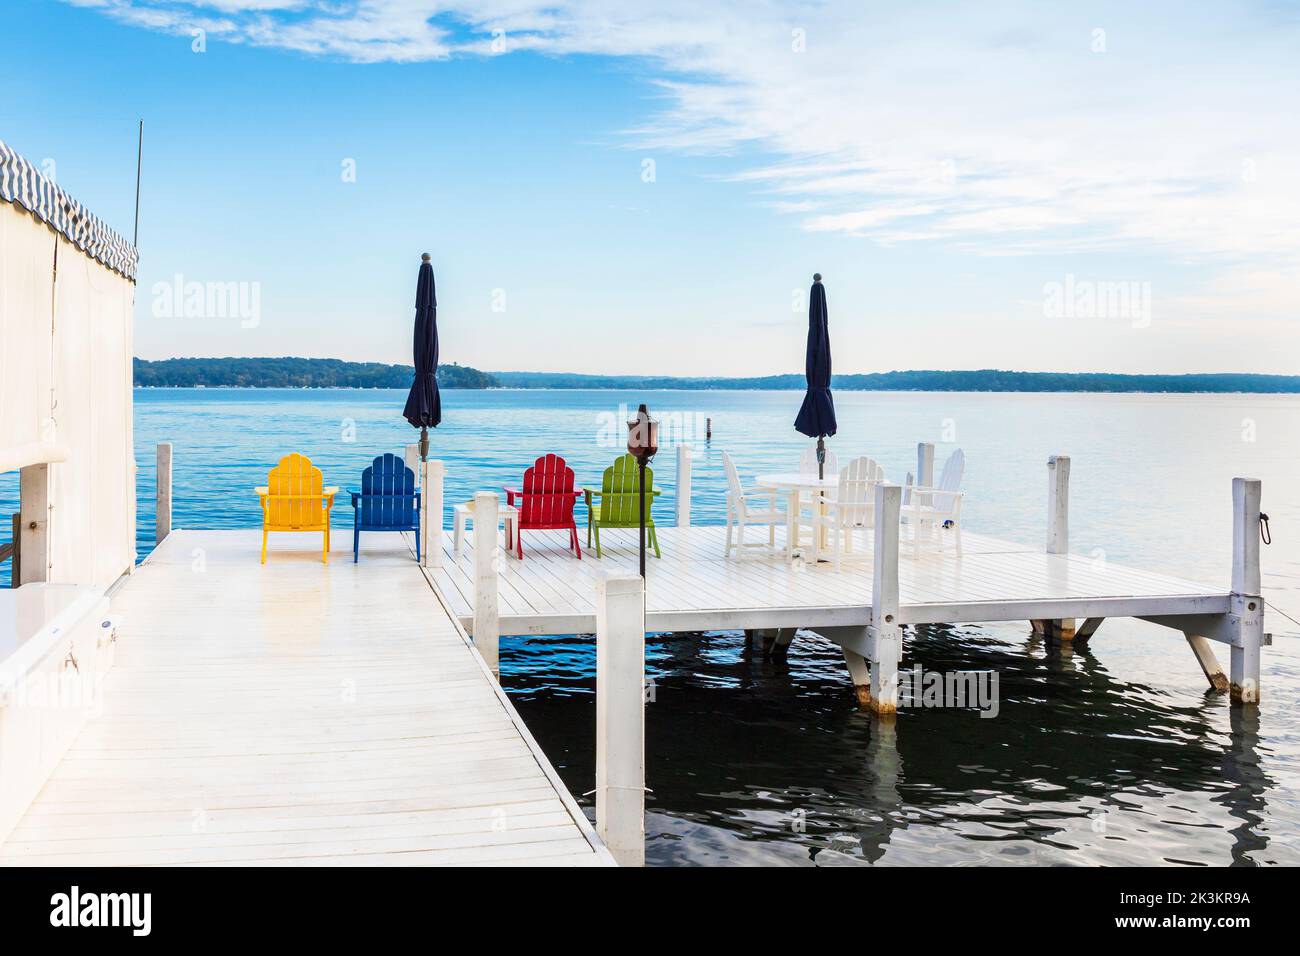 Four coloured wooden chairs and blue shading umbrella on a white wooden pier, Lake Geneva near Fontana, Wisconsin, America. Stock Photo